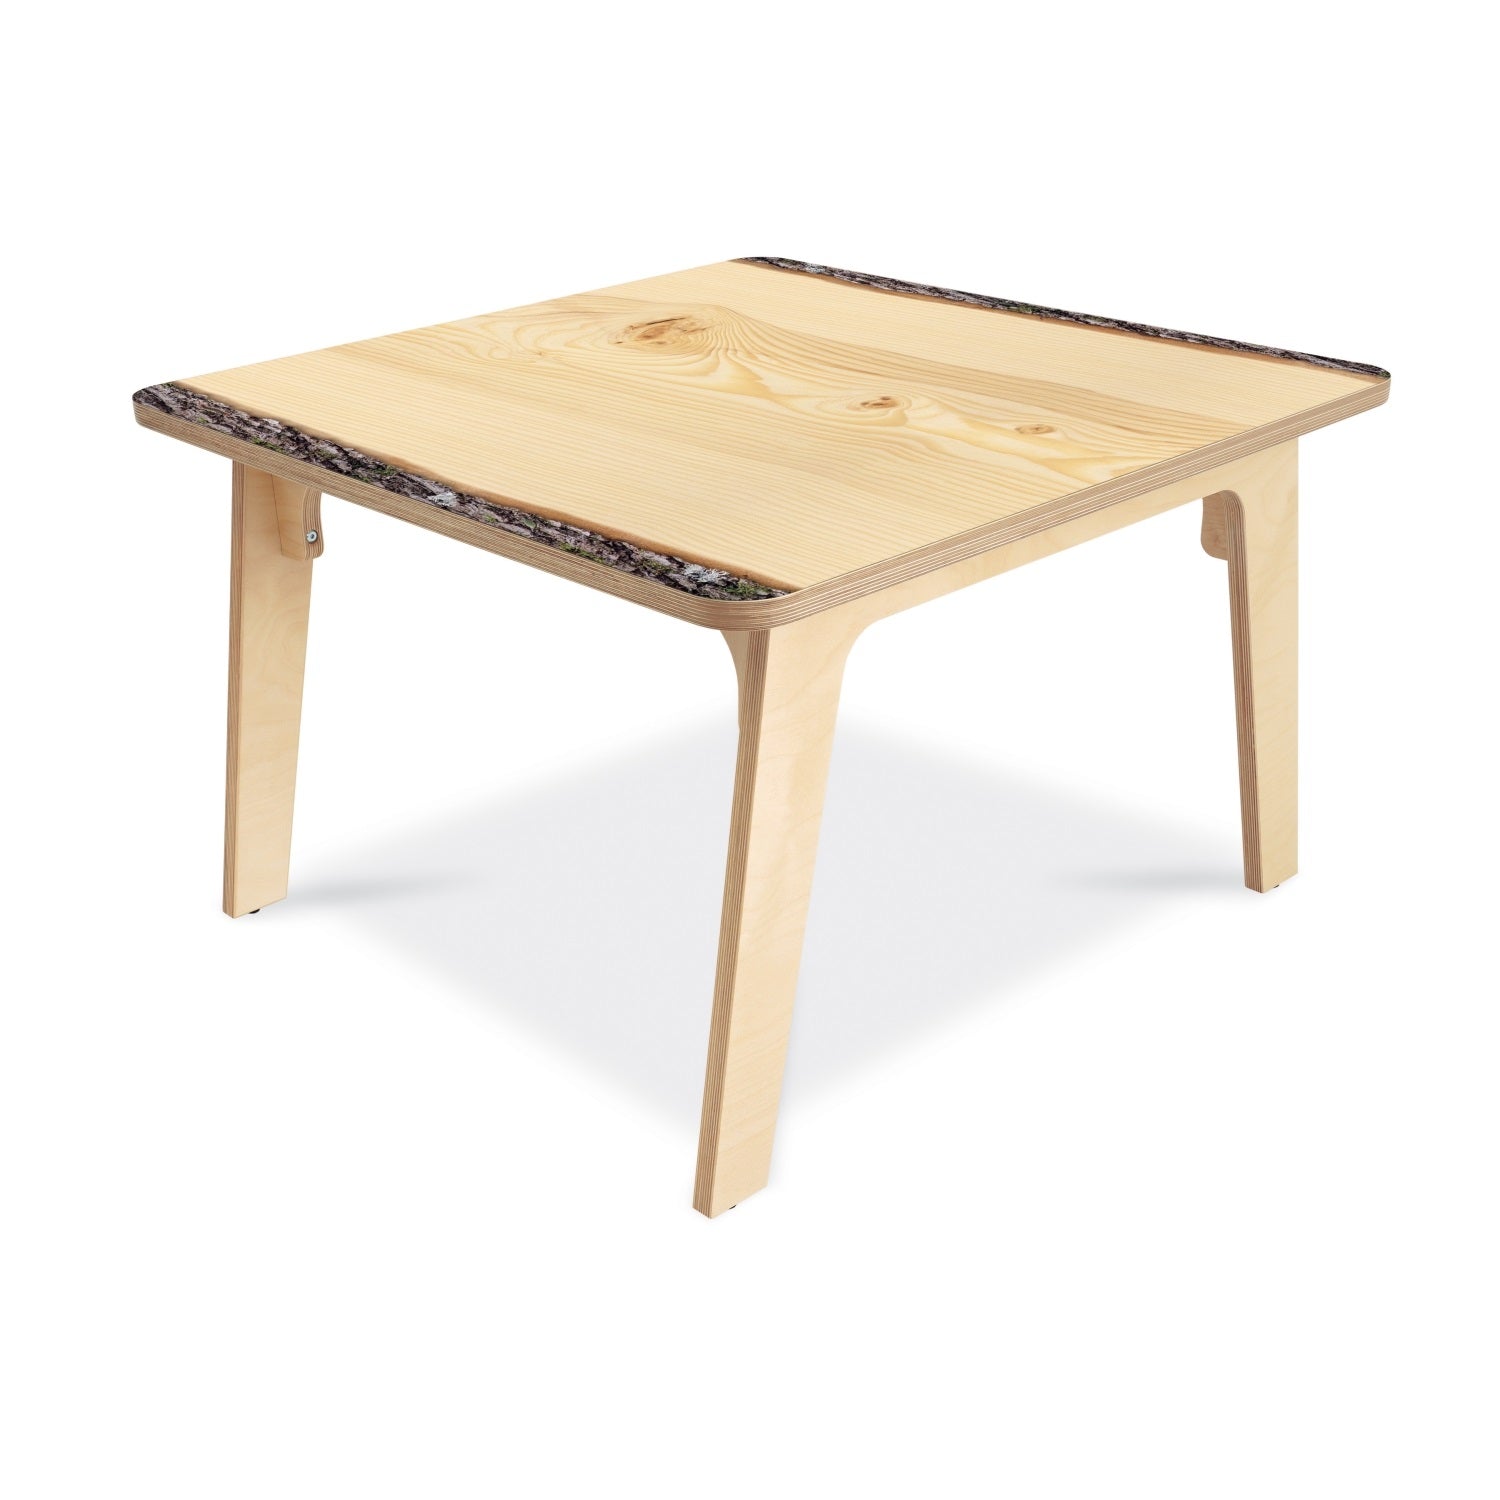 Nature View Live Edge Collection Square Table, 22" High